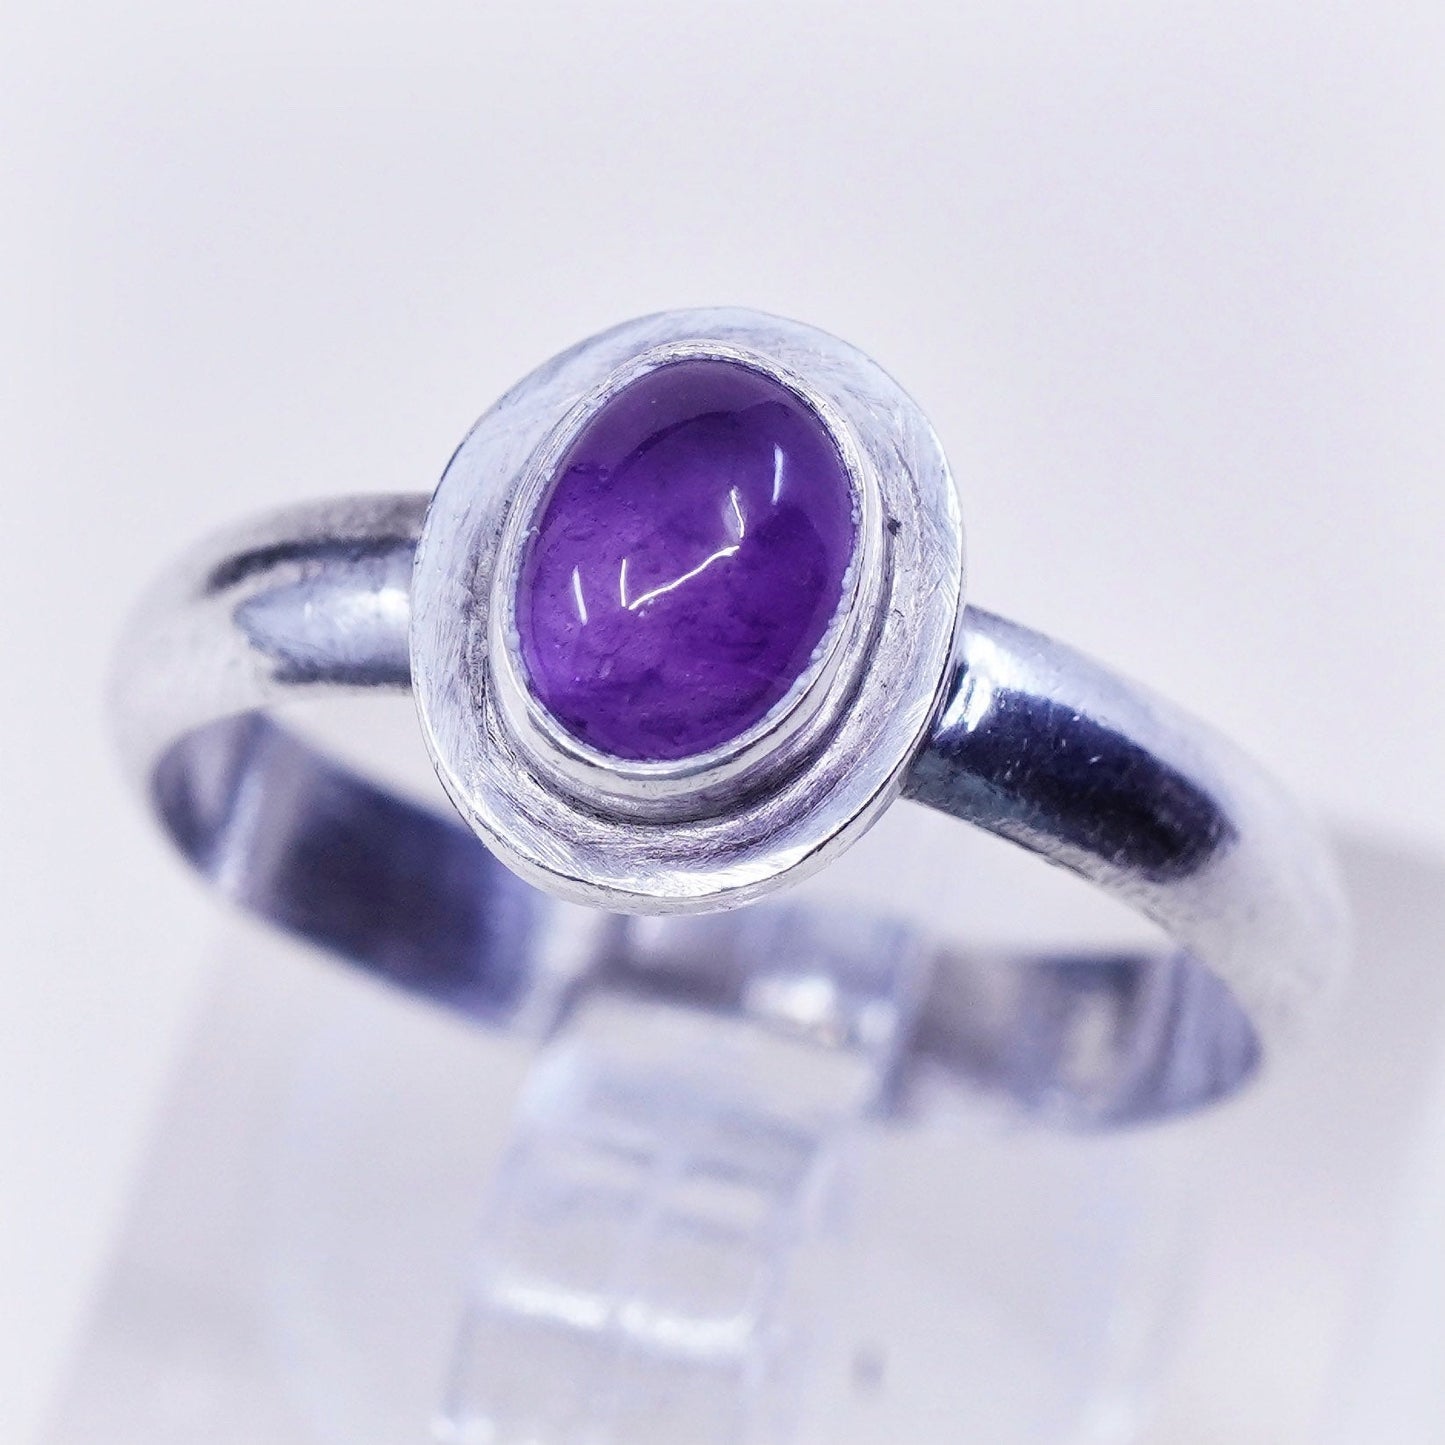 Size 7.5, vintage Sterling 925 silver handmade cocktail ring with amethyst